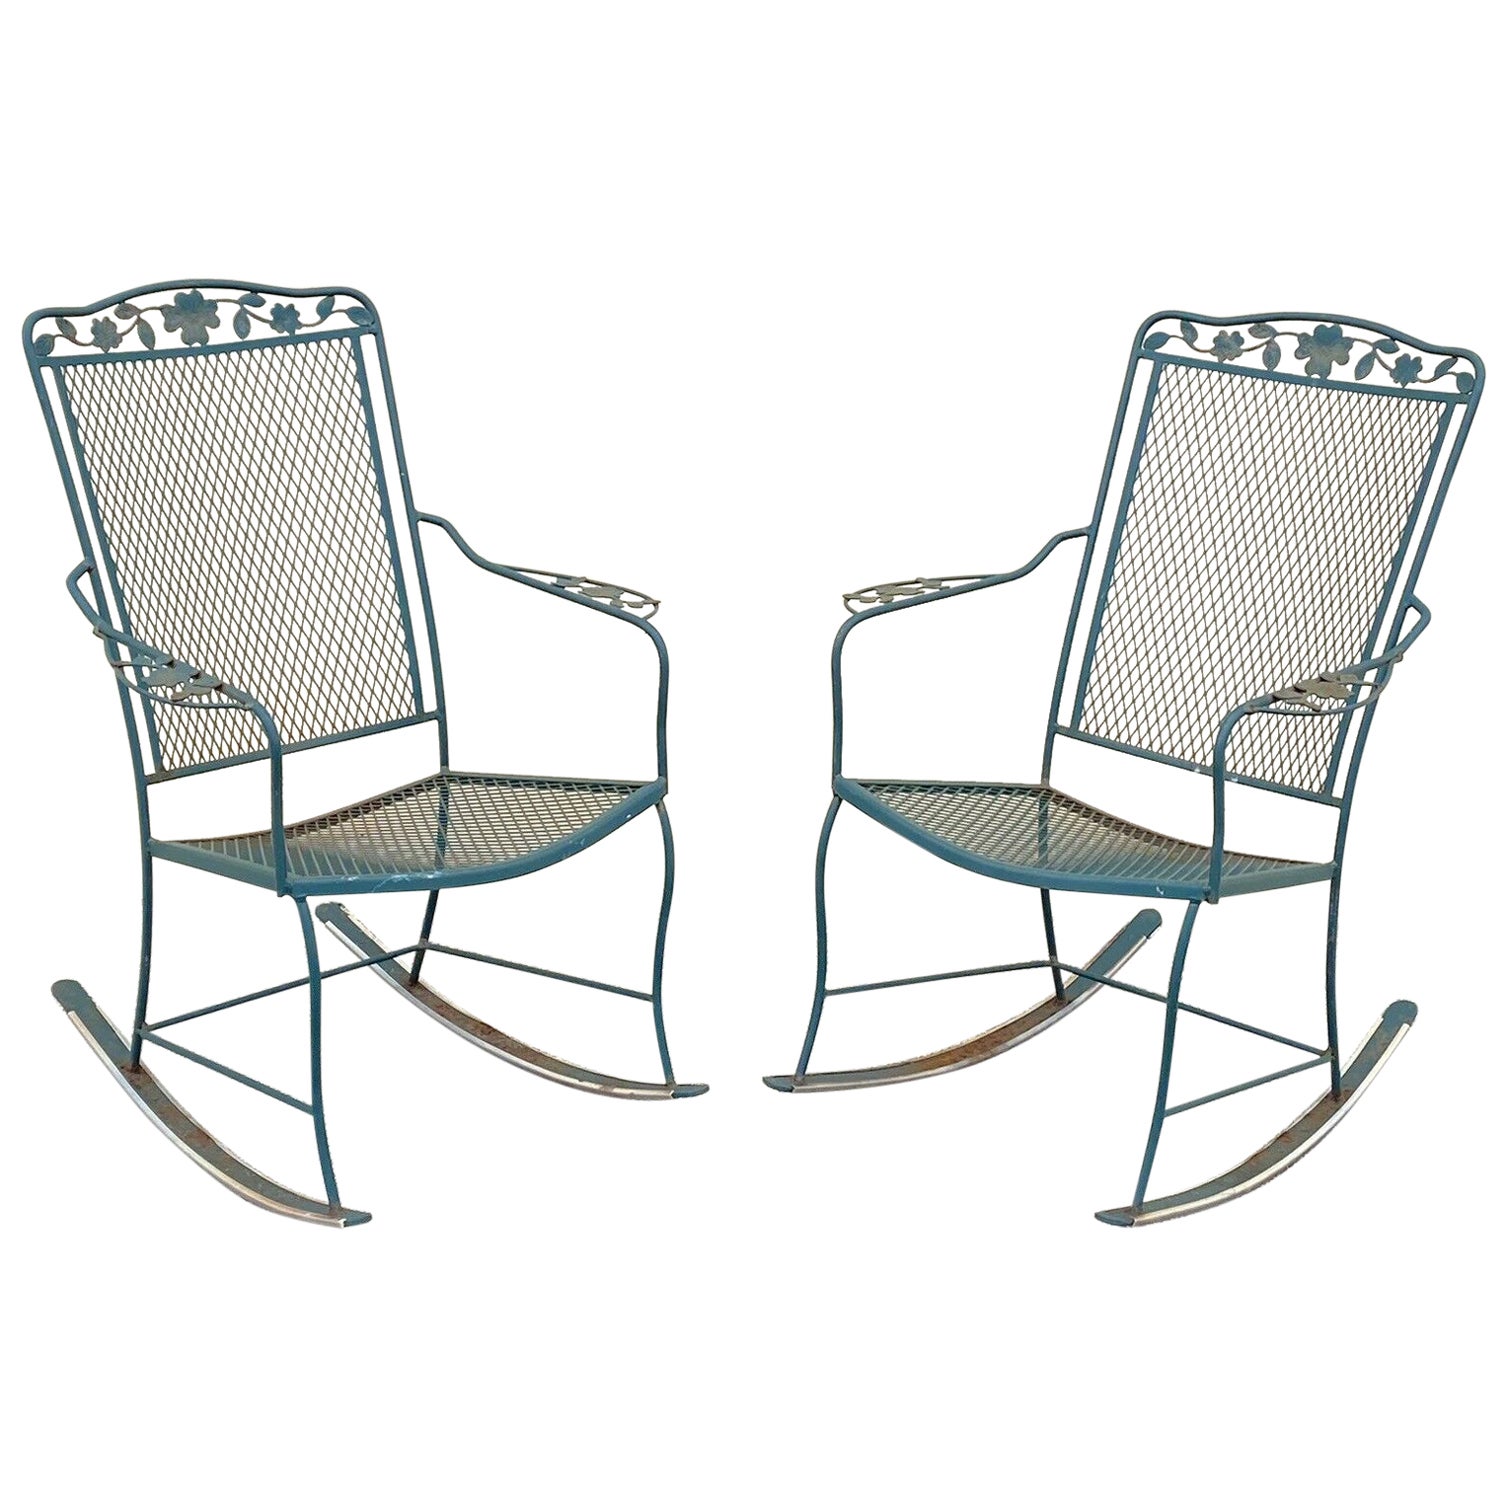 Vtg Wrought Iron Victorian Woodard Style Green Patio Garden Rocking Chair - Pair For Sale